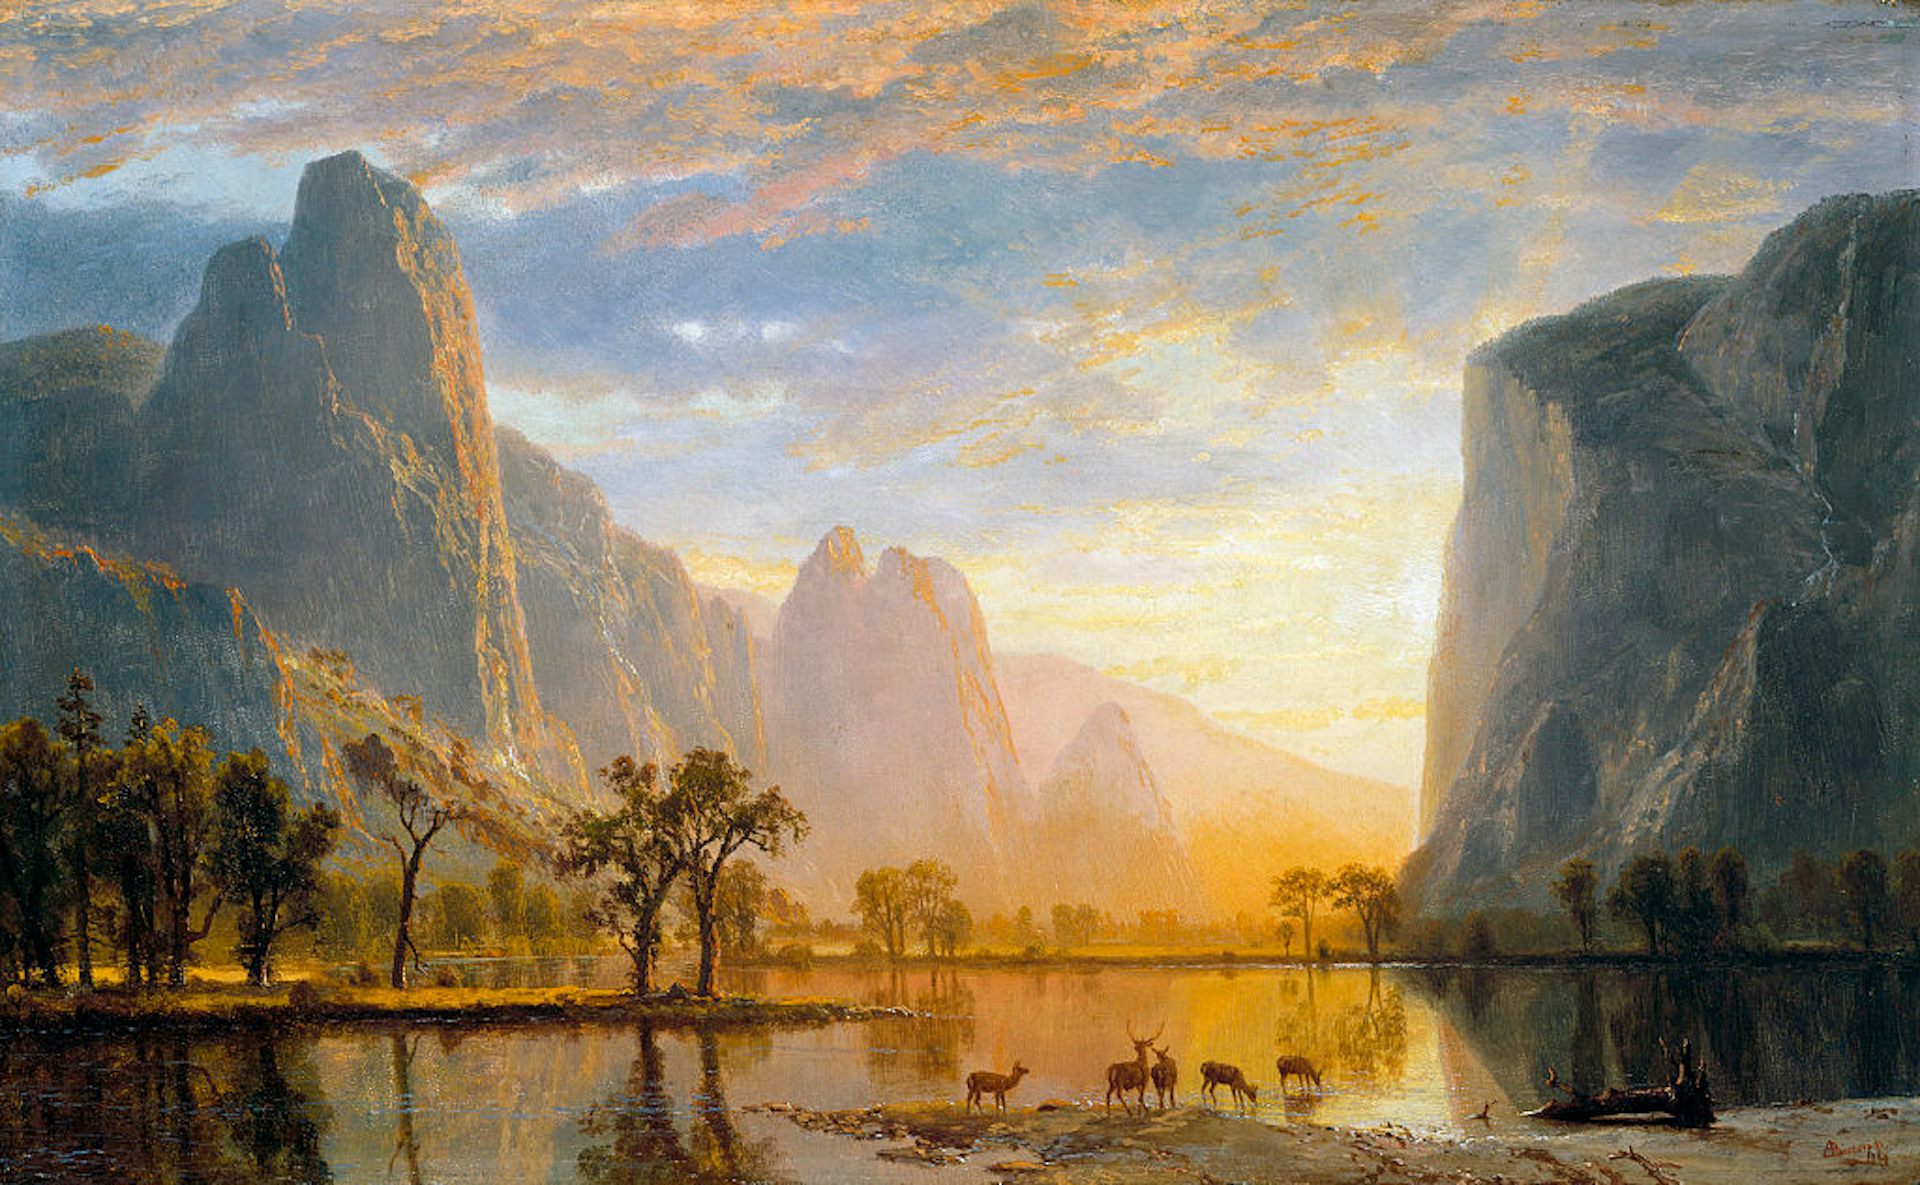 ‘Valley of the Yosemite’ by the 19th-century artist Albert Bierstadt, owned by the Museum of Fine Arts, Boston